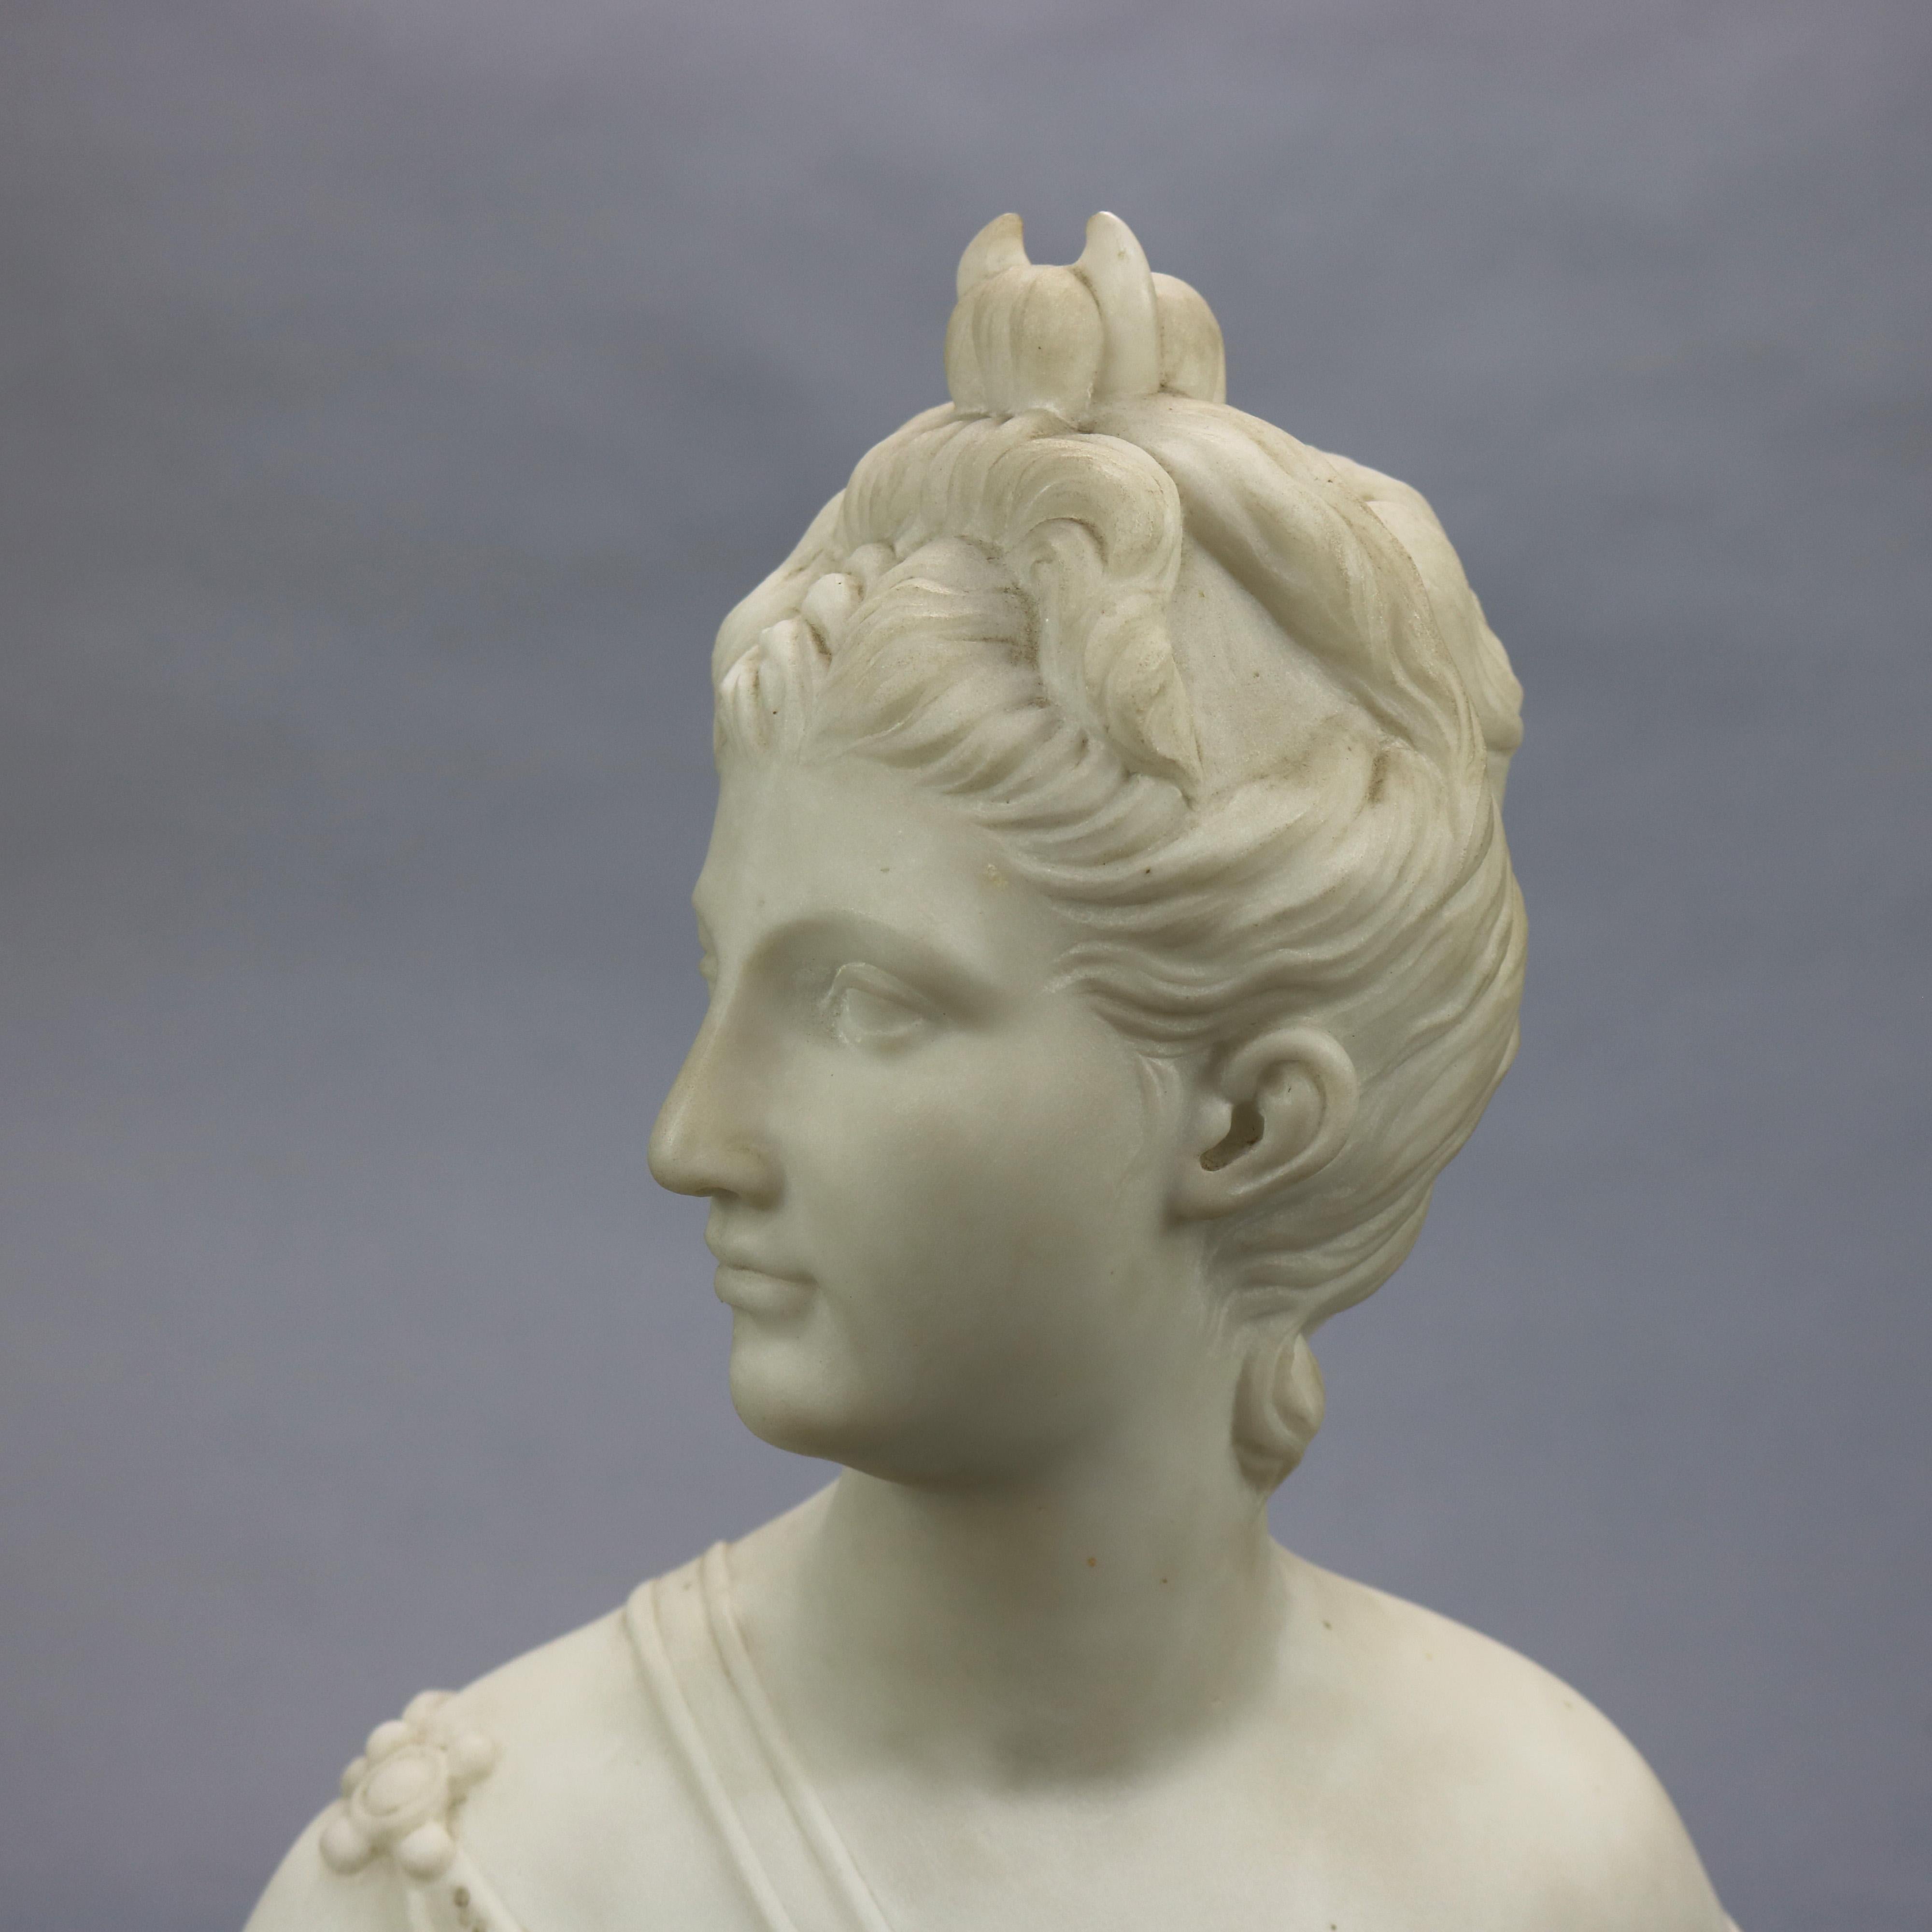 19th Century Antique Classical Carved Alabaster Sculpture of Roman Diana the Huntress, c1890